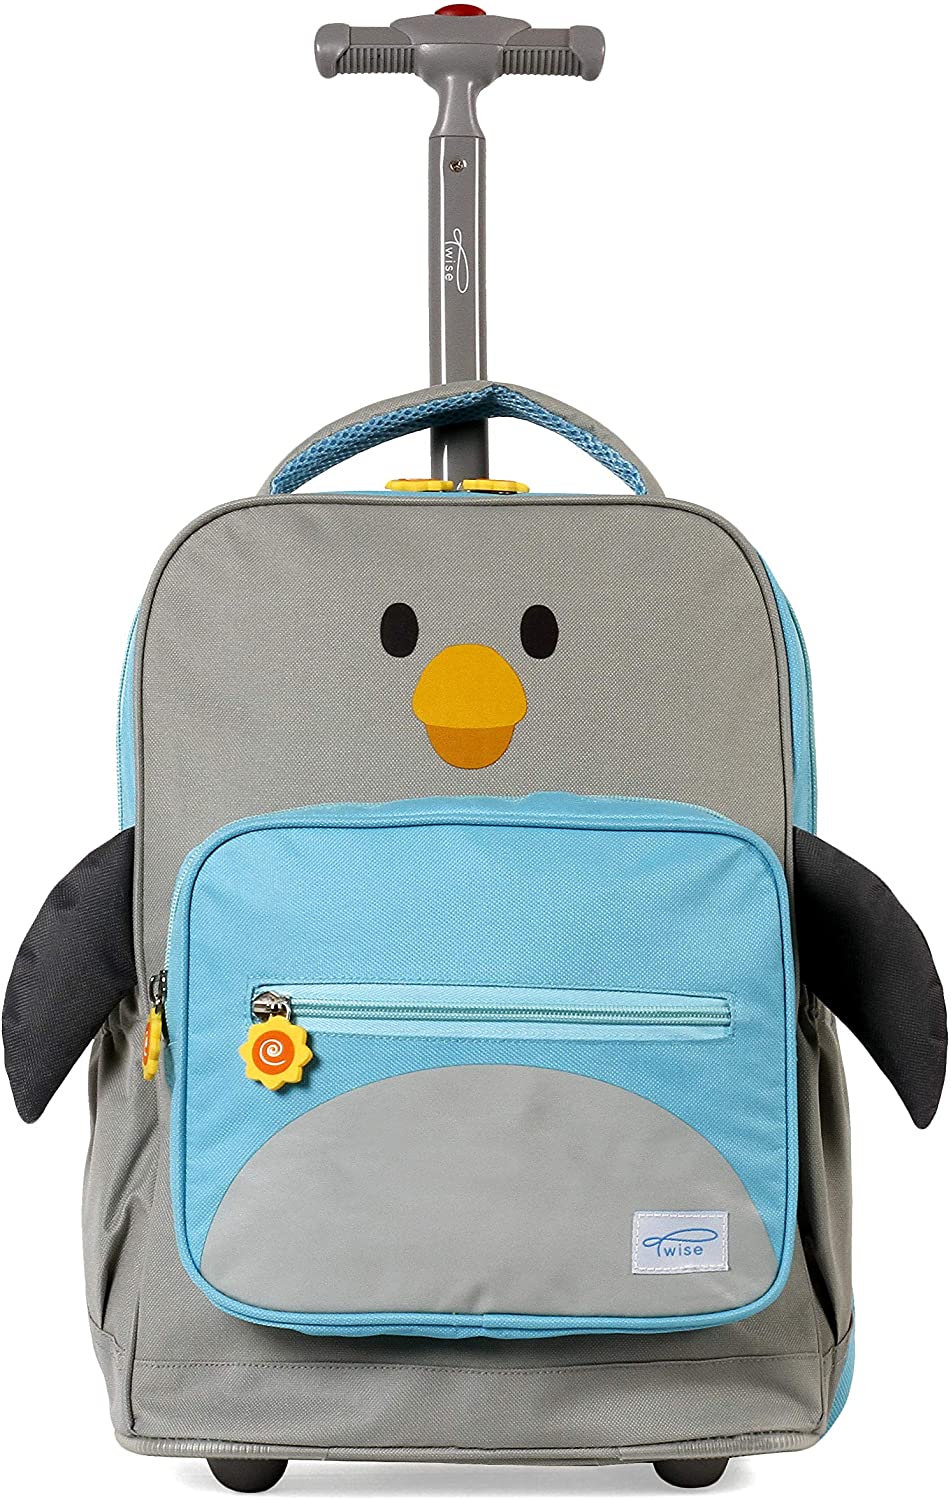 TWISE SIDE-KICK TRAVEL ROLLING BACKPACK FOR KIDS AND TODDLERS (PENGUIN)